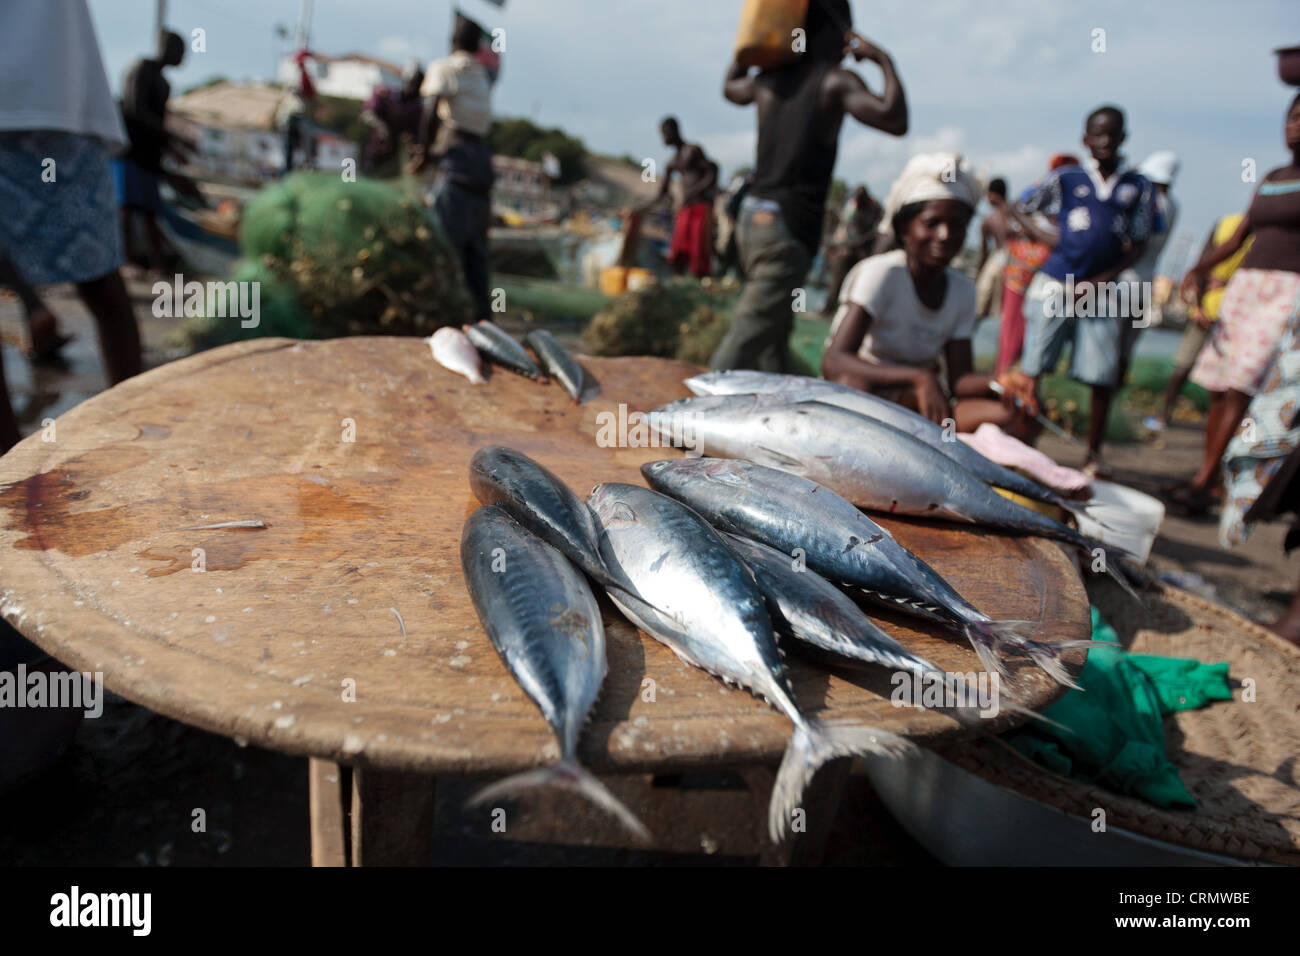 Fish is laid out for sale at the market in Elmina, about 130km west of Ghana's capital Accra on Thursday April 9, 2009. Stock Photo